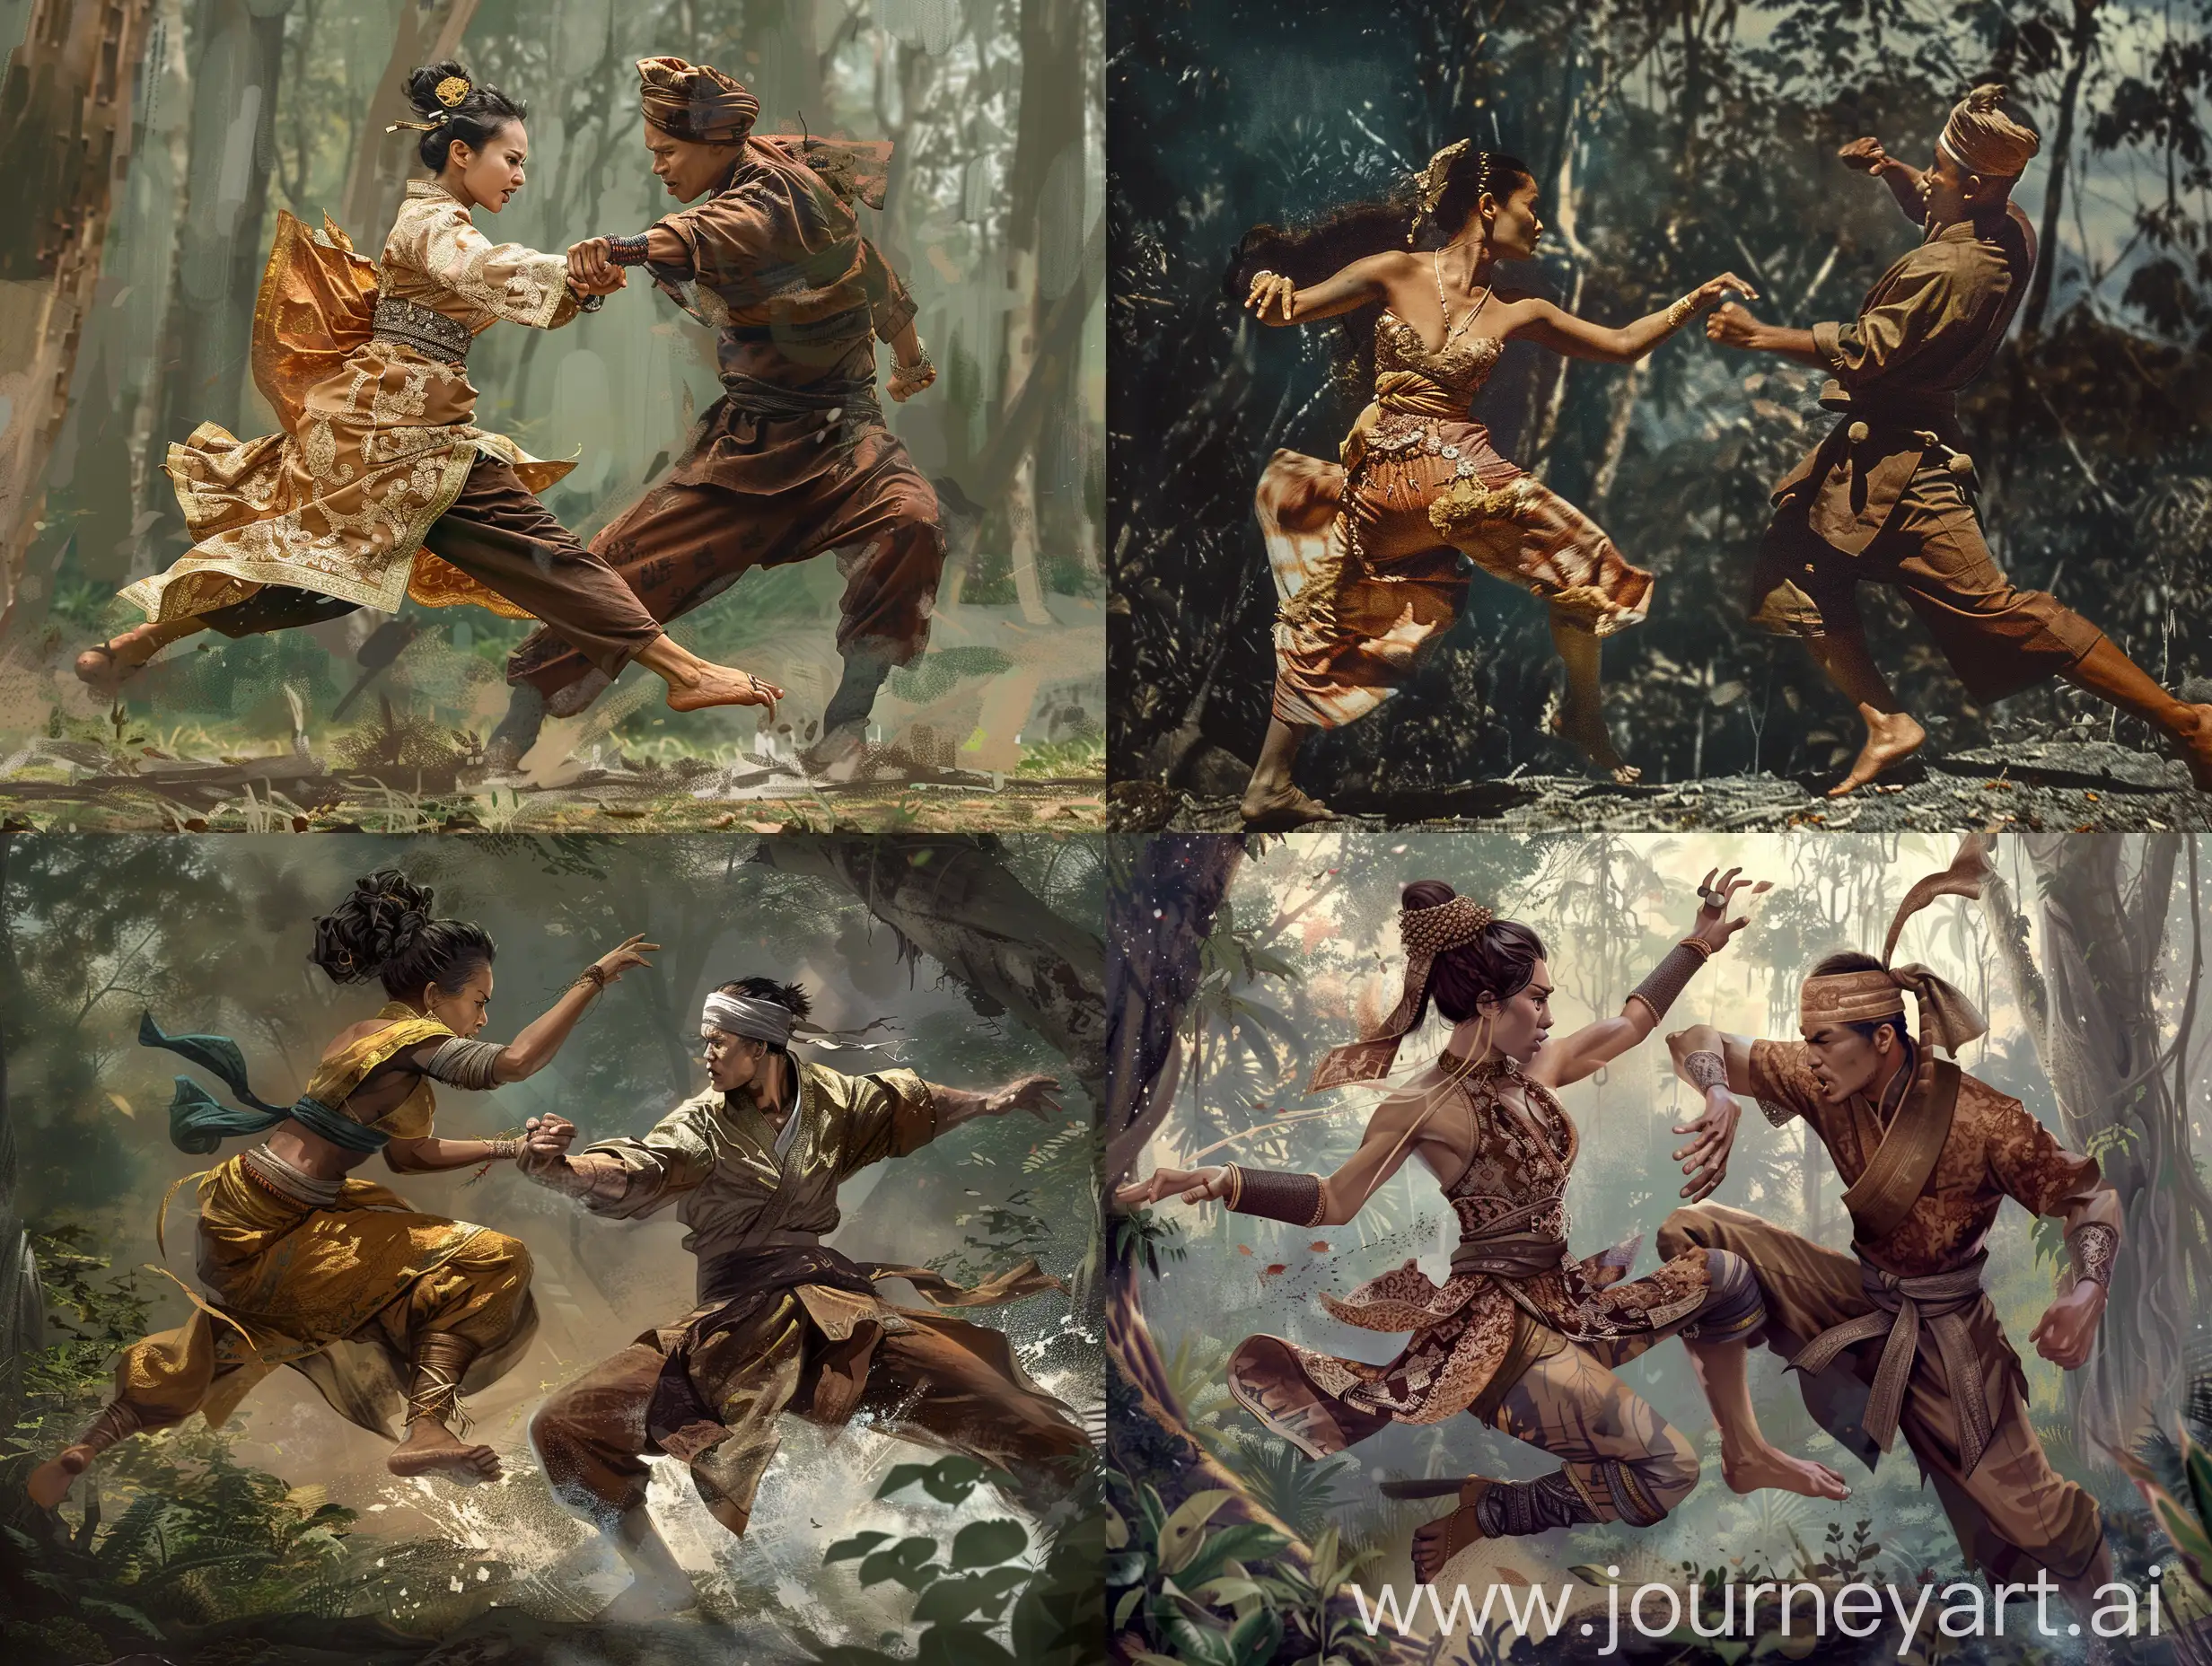 two royal warrior fighters in traditional Indonesian clothing. a woman with long hair in a bun, wearing a mid-century dress and a man wearing a cloth headband, wearing brown clothes. they engage in a martial arts duel. A woman is in the air, delivering a powerful kick, while a man skillfully avoids the attack by crouching. The intensity of their confrontation is clearly visible. The forest setting,